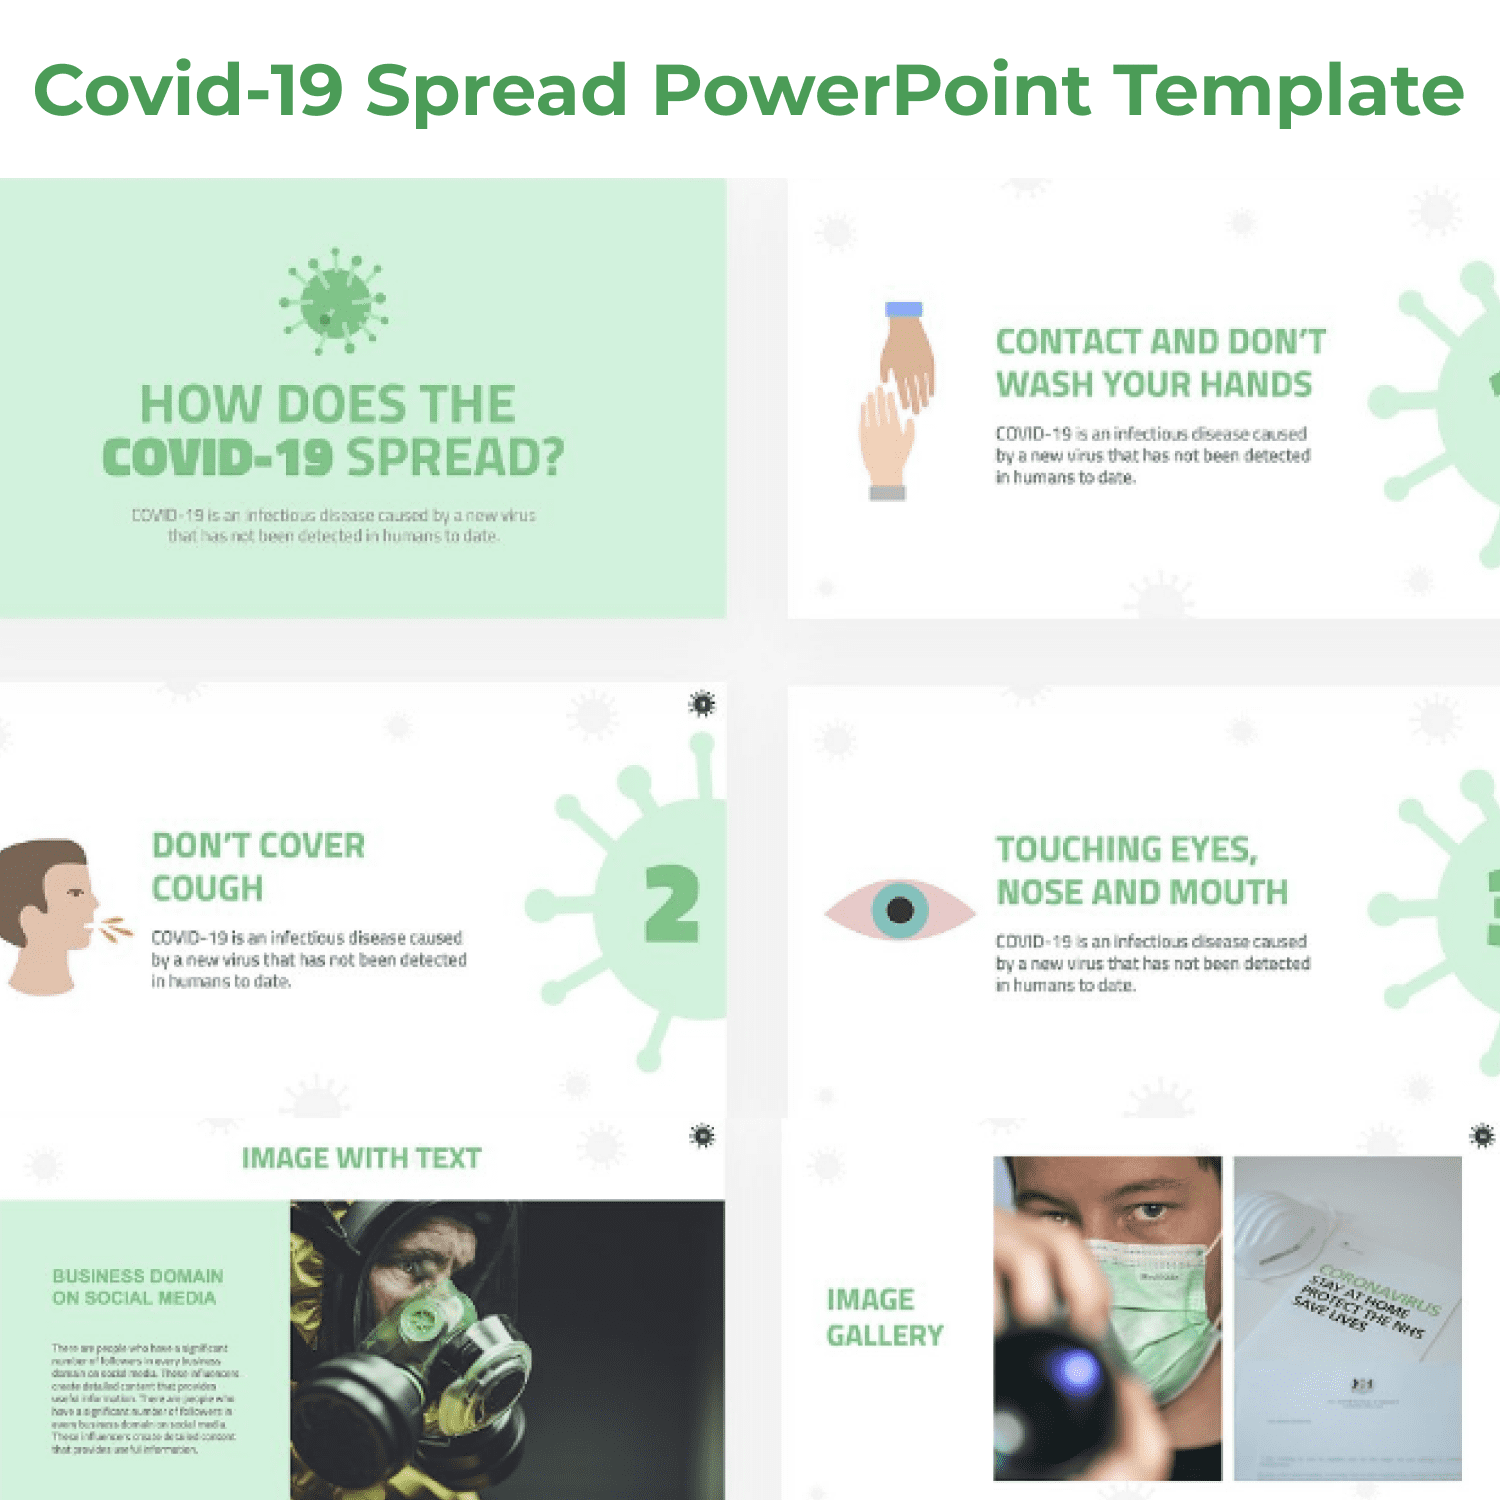 Covid-19 Spread PowerPoint Template cover image.